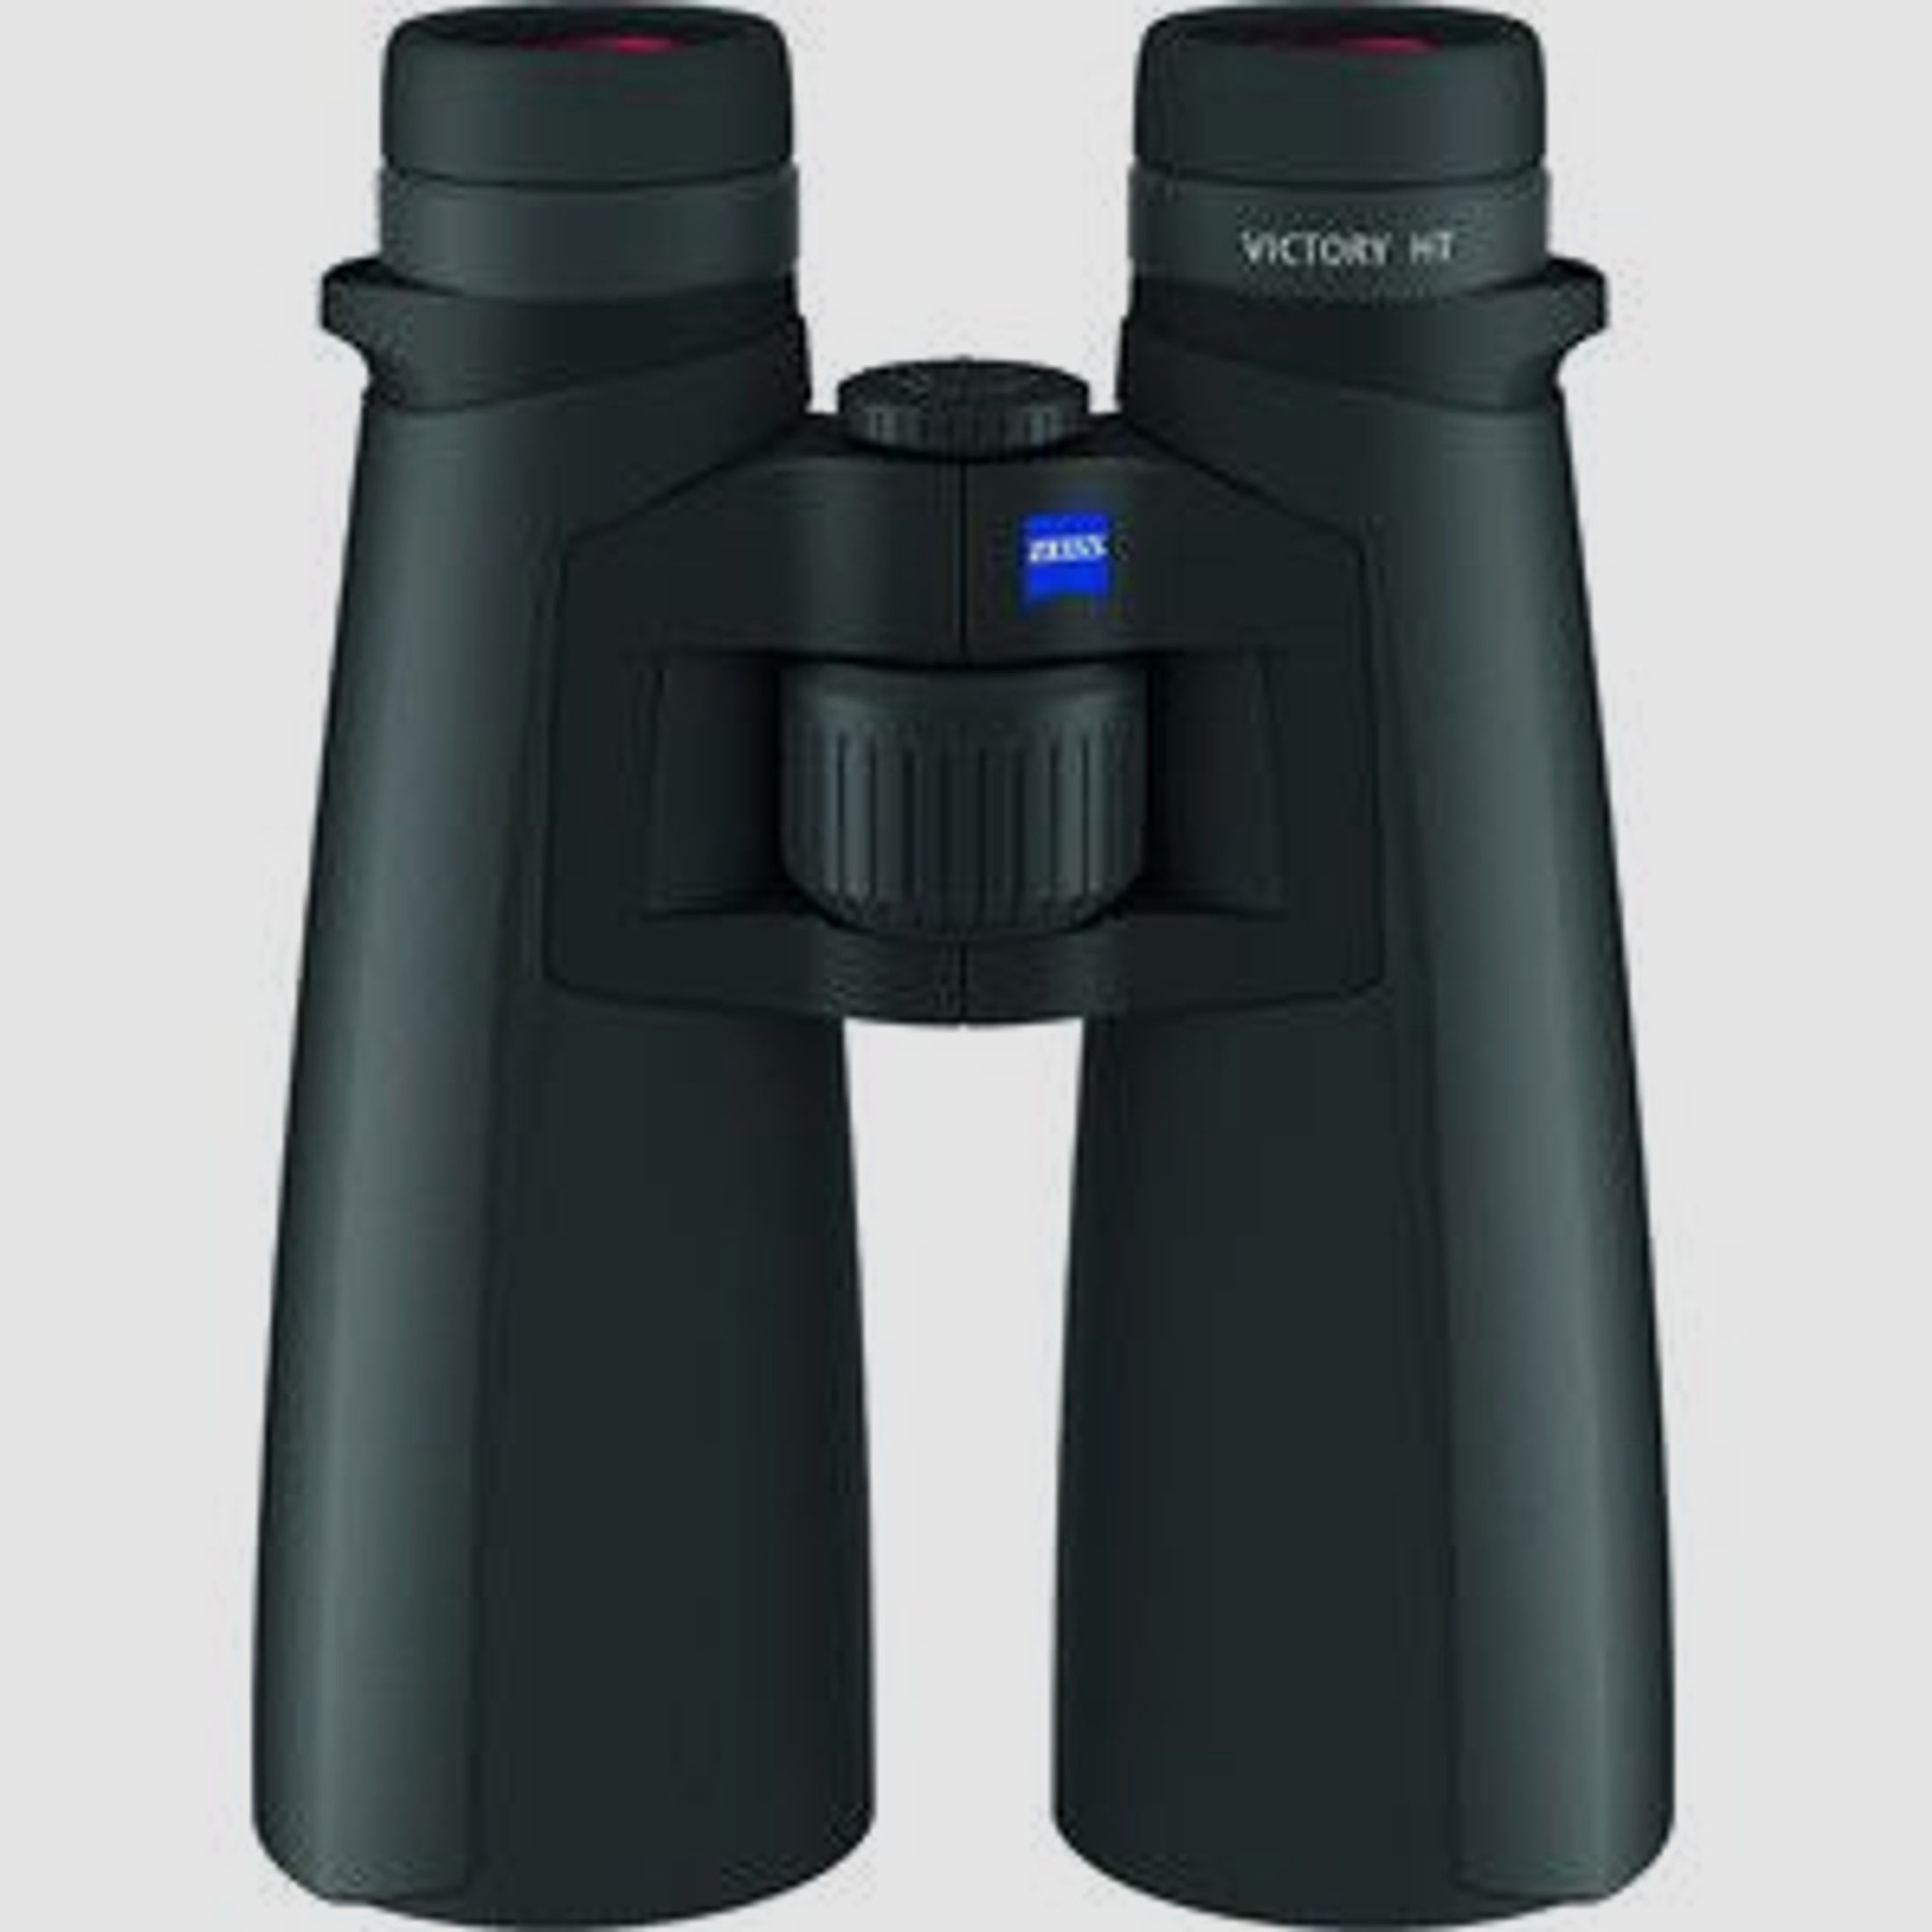 ZEISS Victory HT 10 x 54